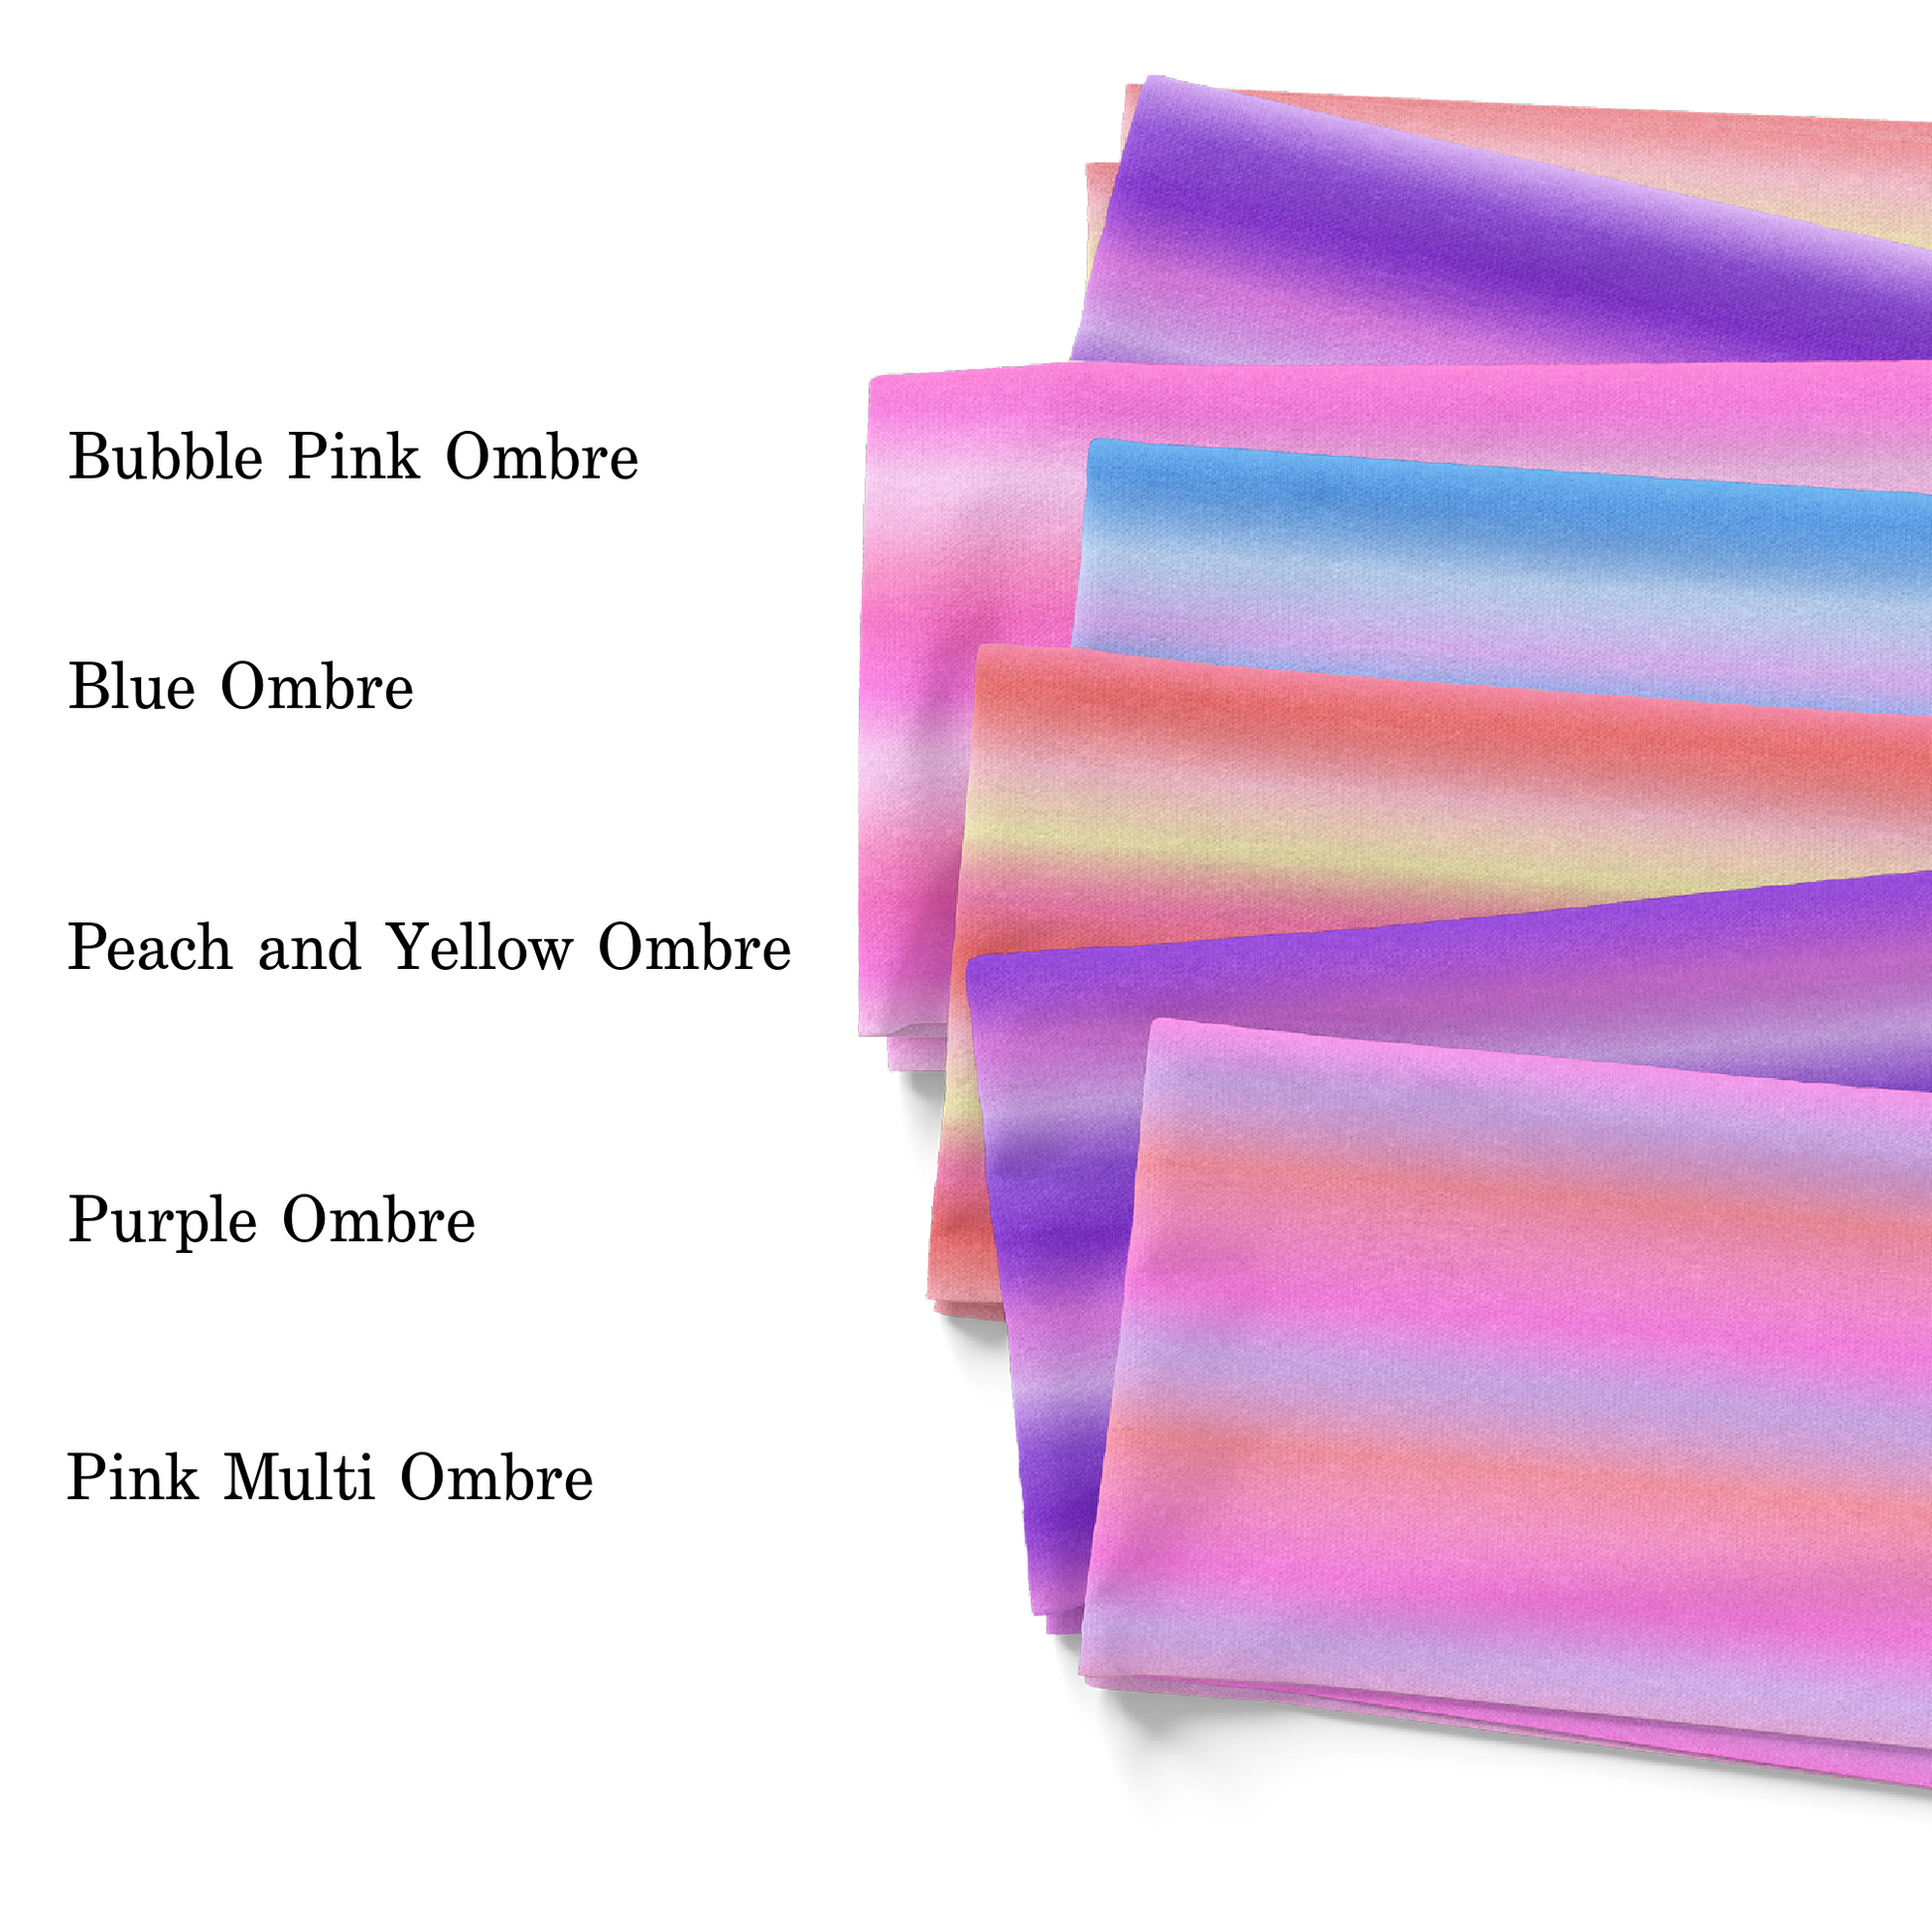 Fabric samples of summer ombre print fabric in Bubble pink, Blue, Peach and yellow, Purple, and Pink Multi Ombre.